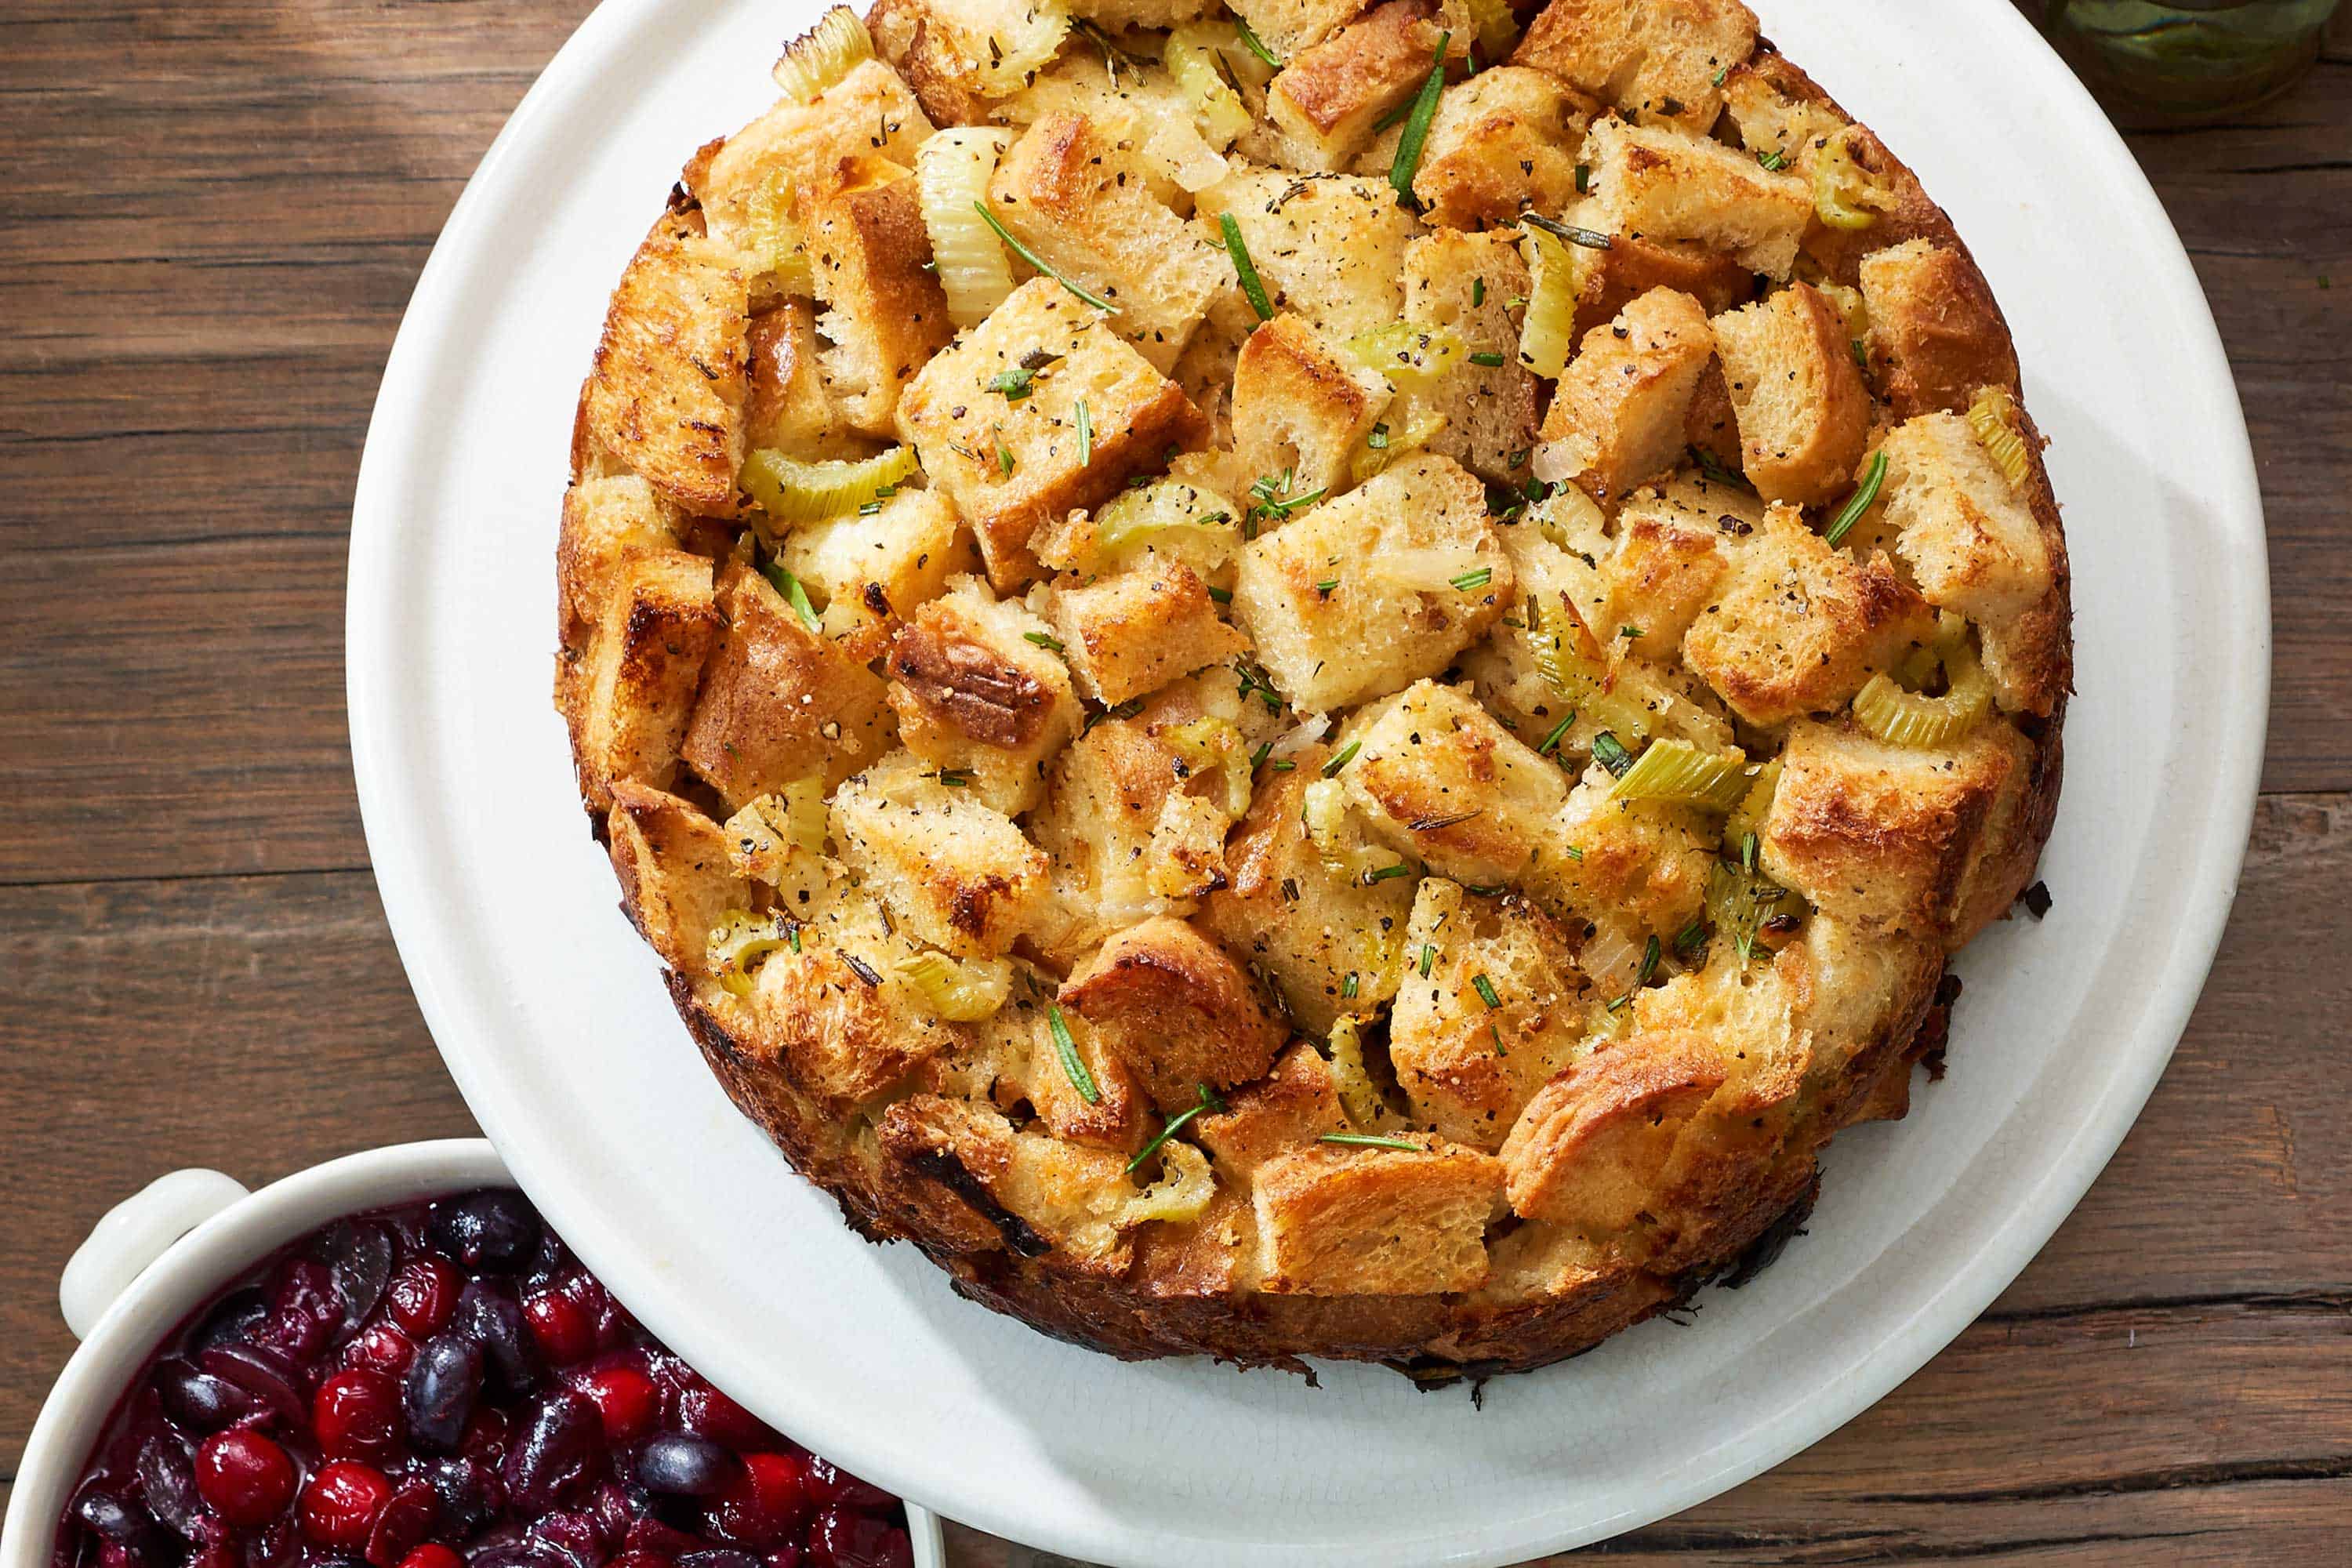 Thanksgiving Sides for Thanksgiving - Monkey bread stuffing